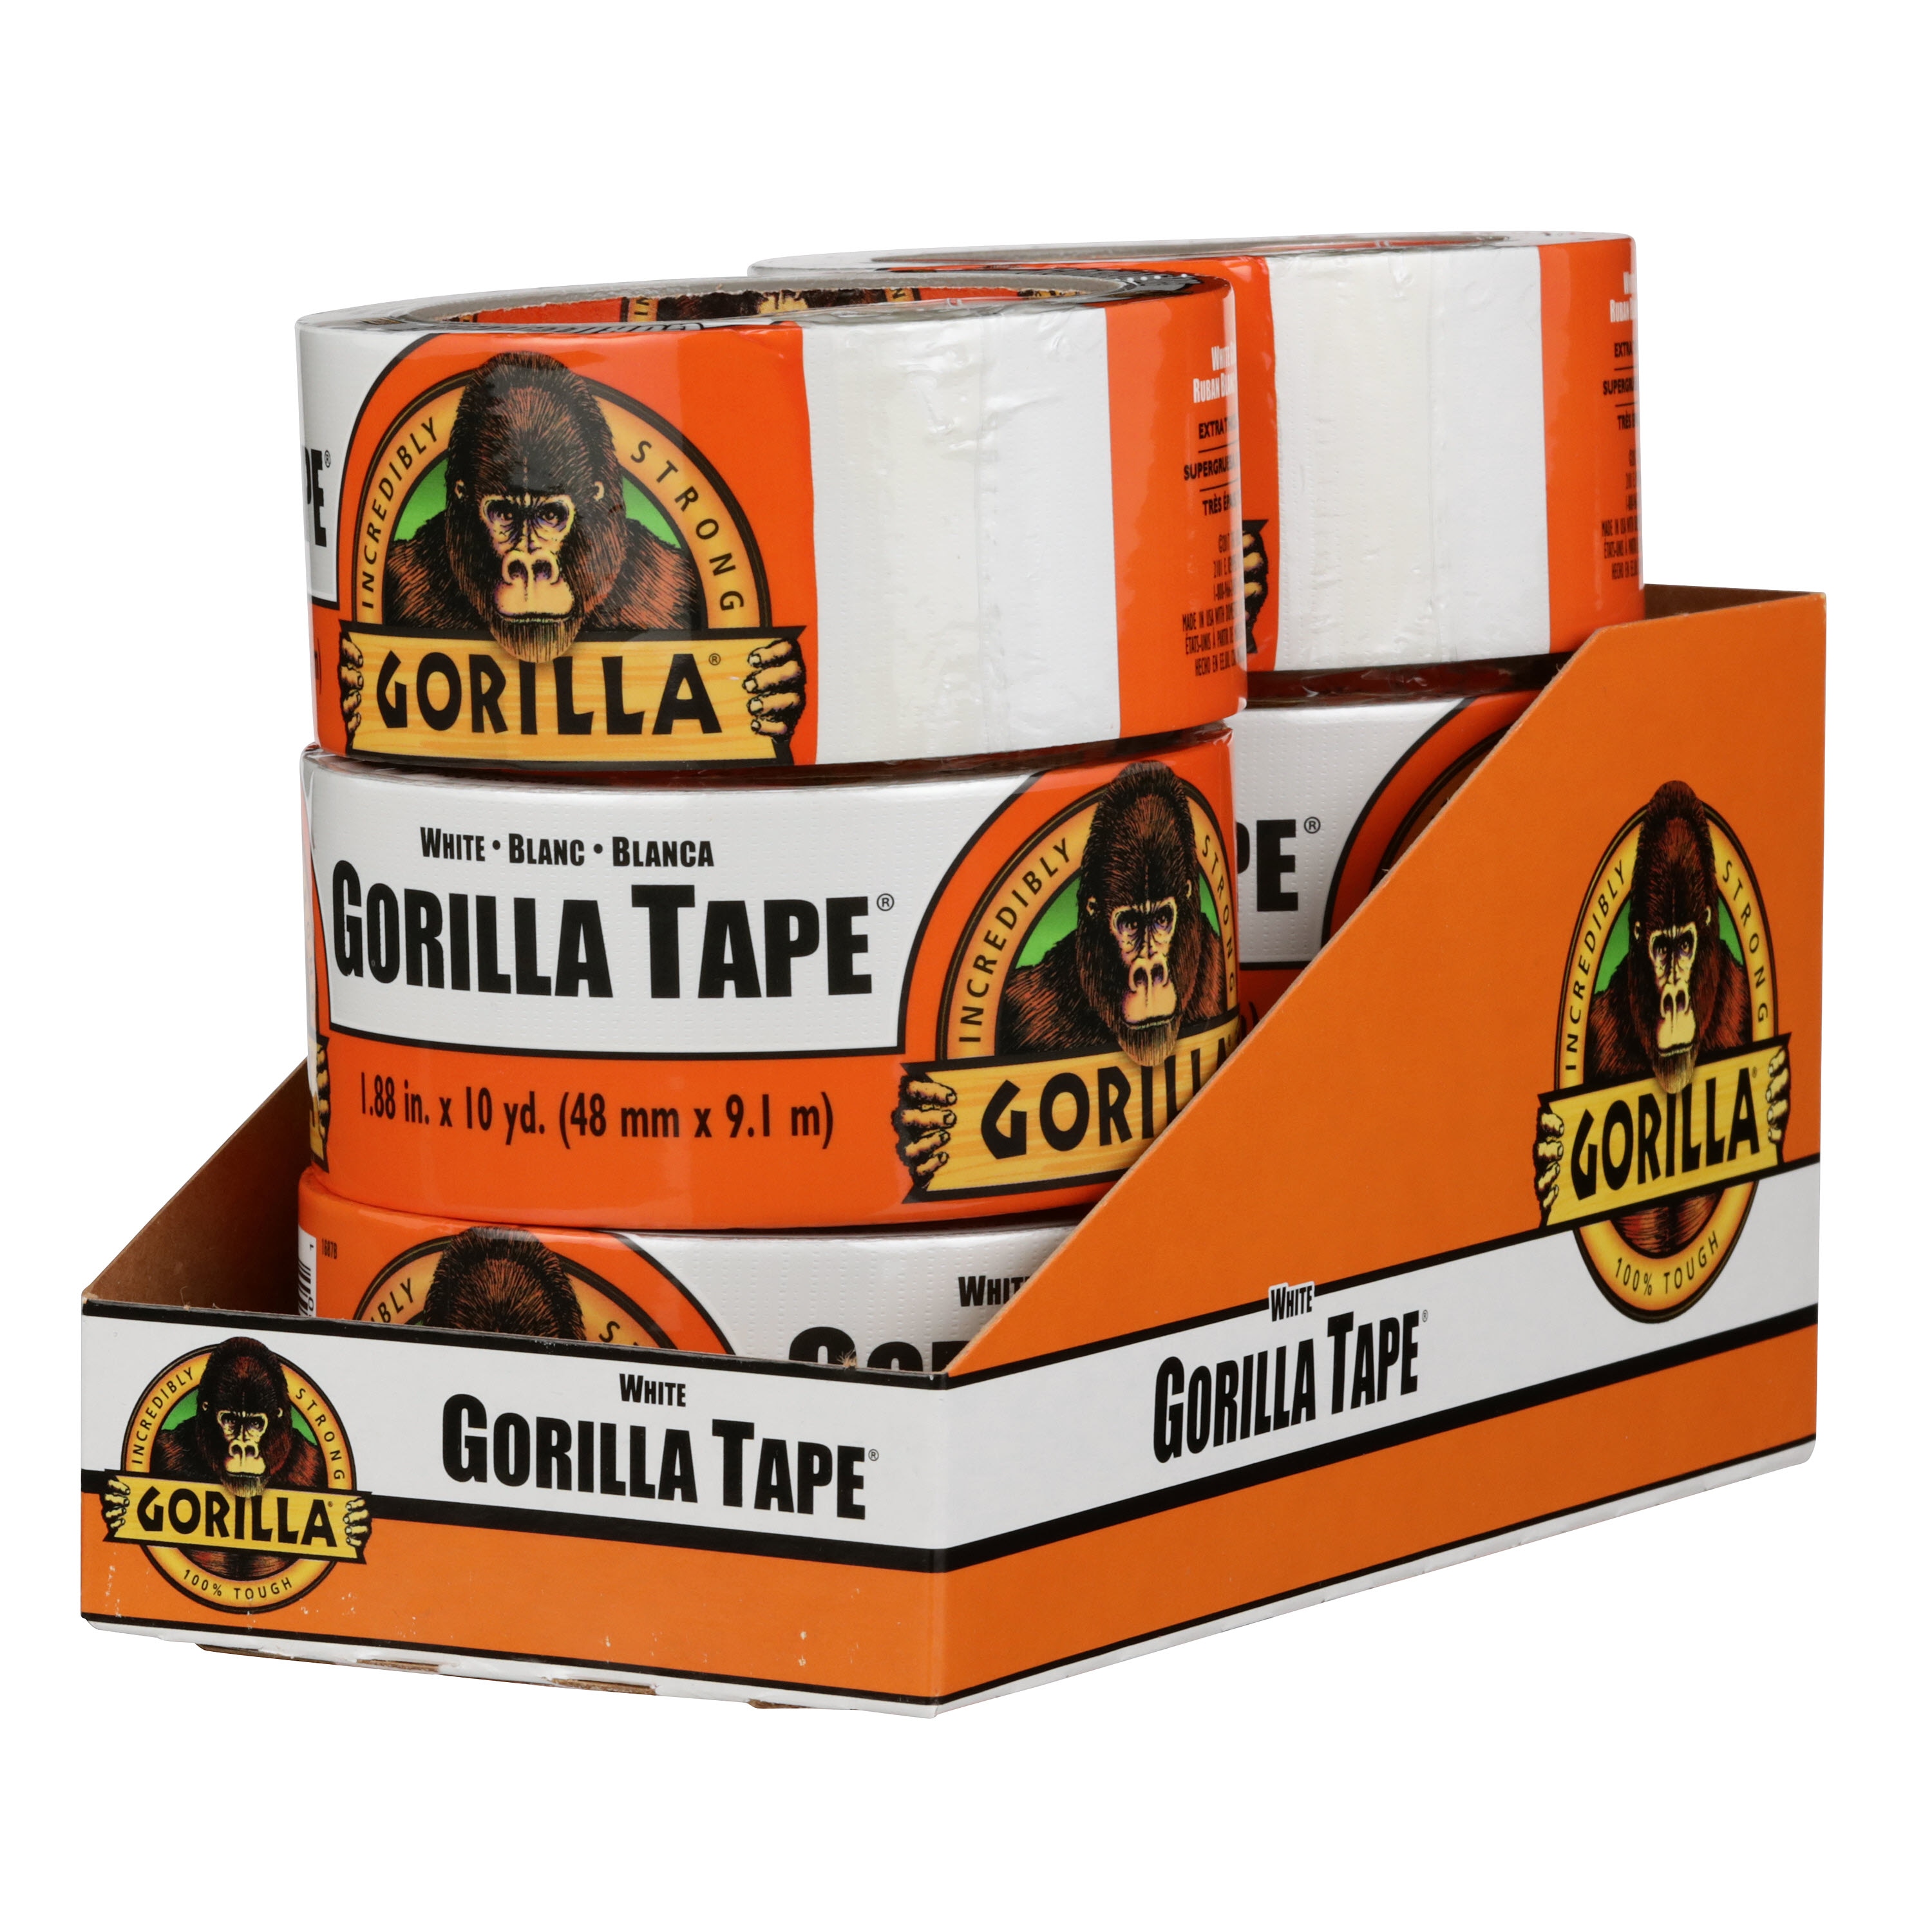 Gorilla Tape, White Duct Tape, 1.88 in. x 10 yd, White, Pack of 2 